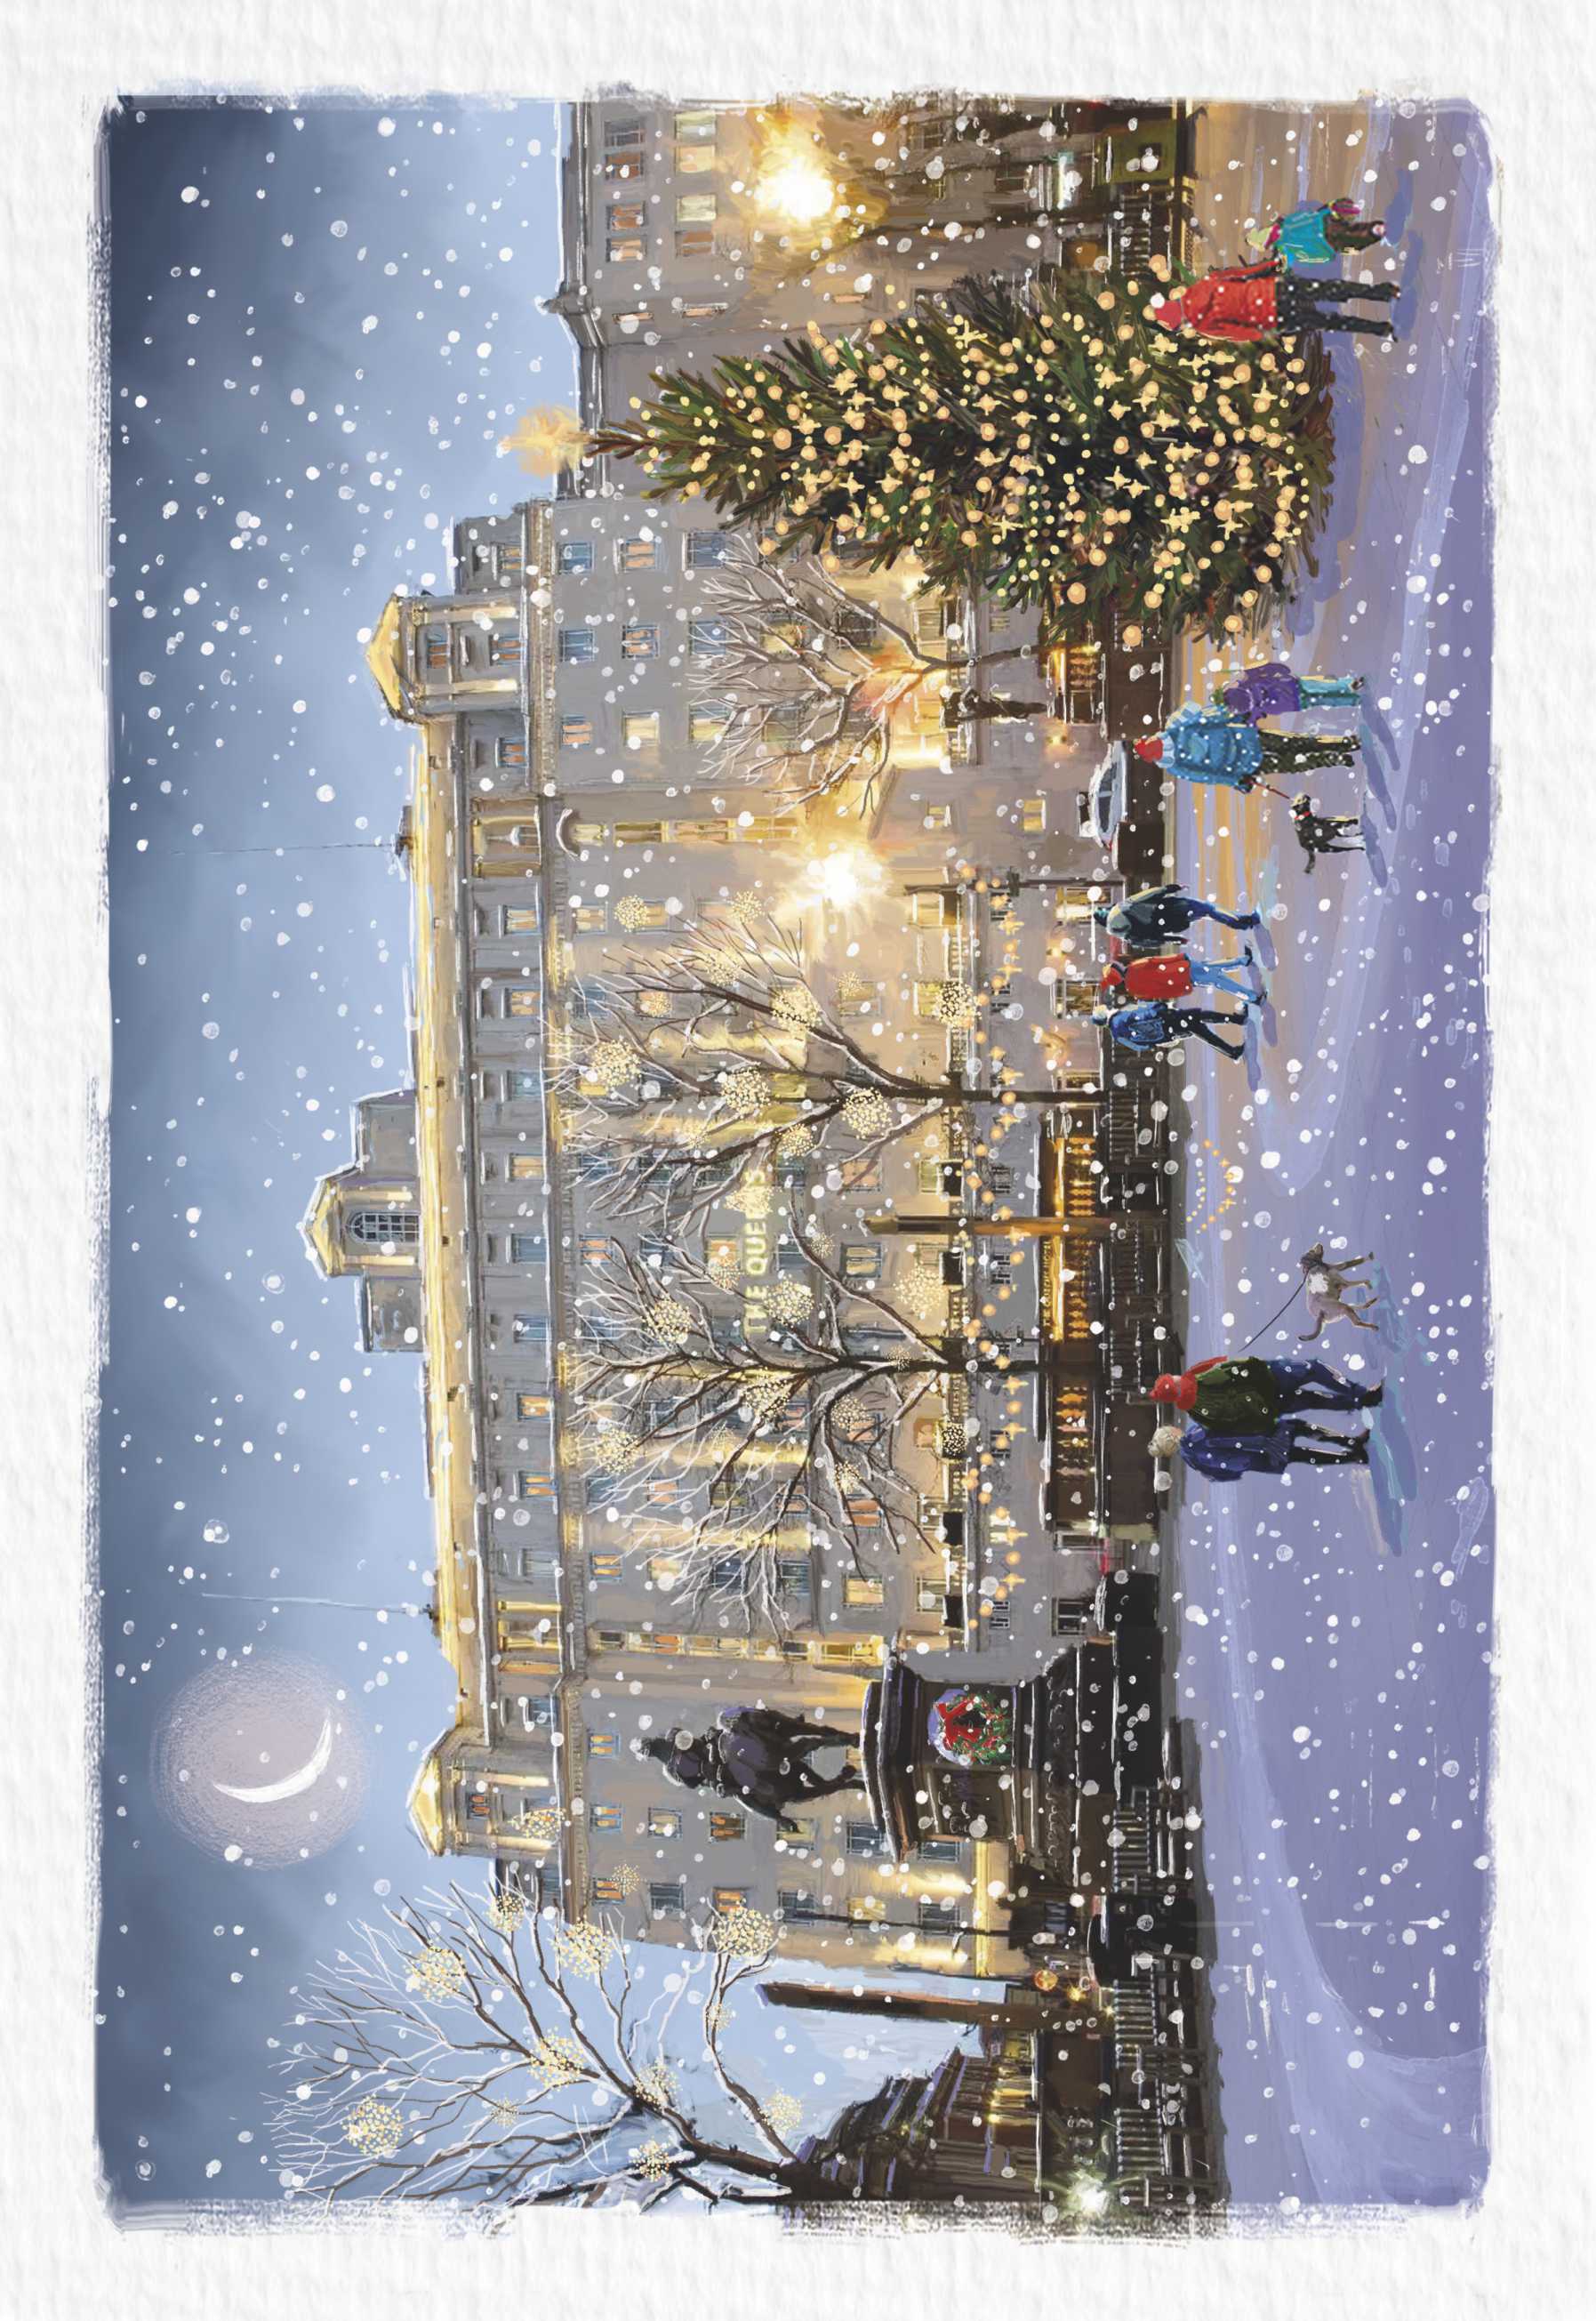 Illustration of The Queens Hotel at twilight. The street lights and moon are glowing, there is snow on the ground. Small groups of people are walking, some with dogs or children, and there is a lit up Christmas tree in the foreground.